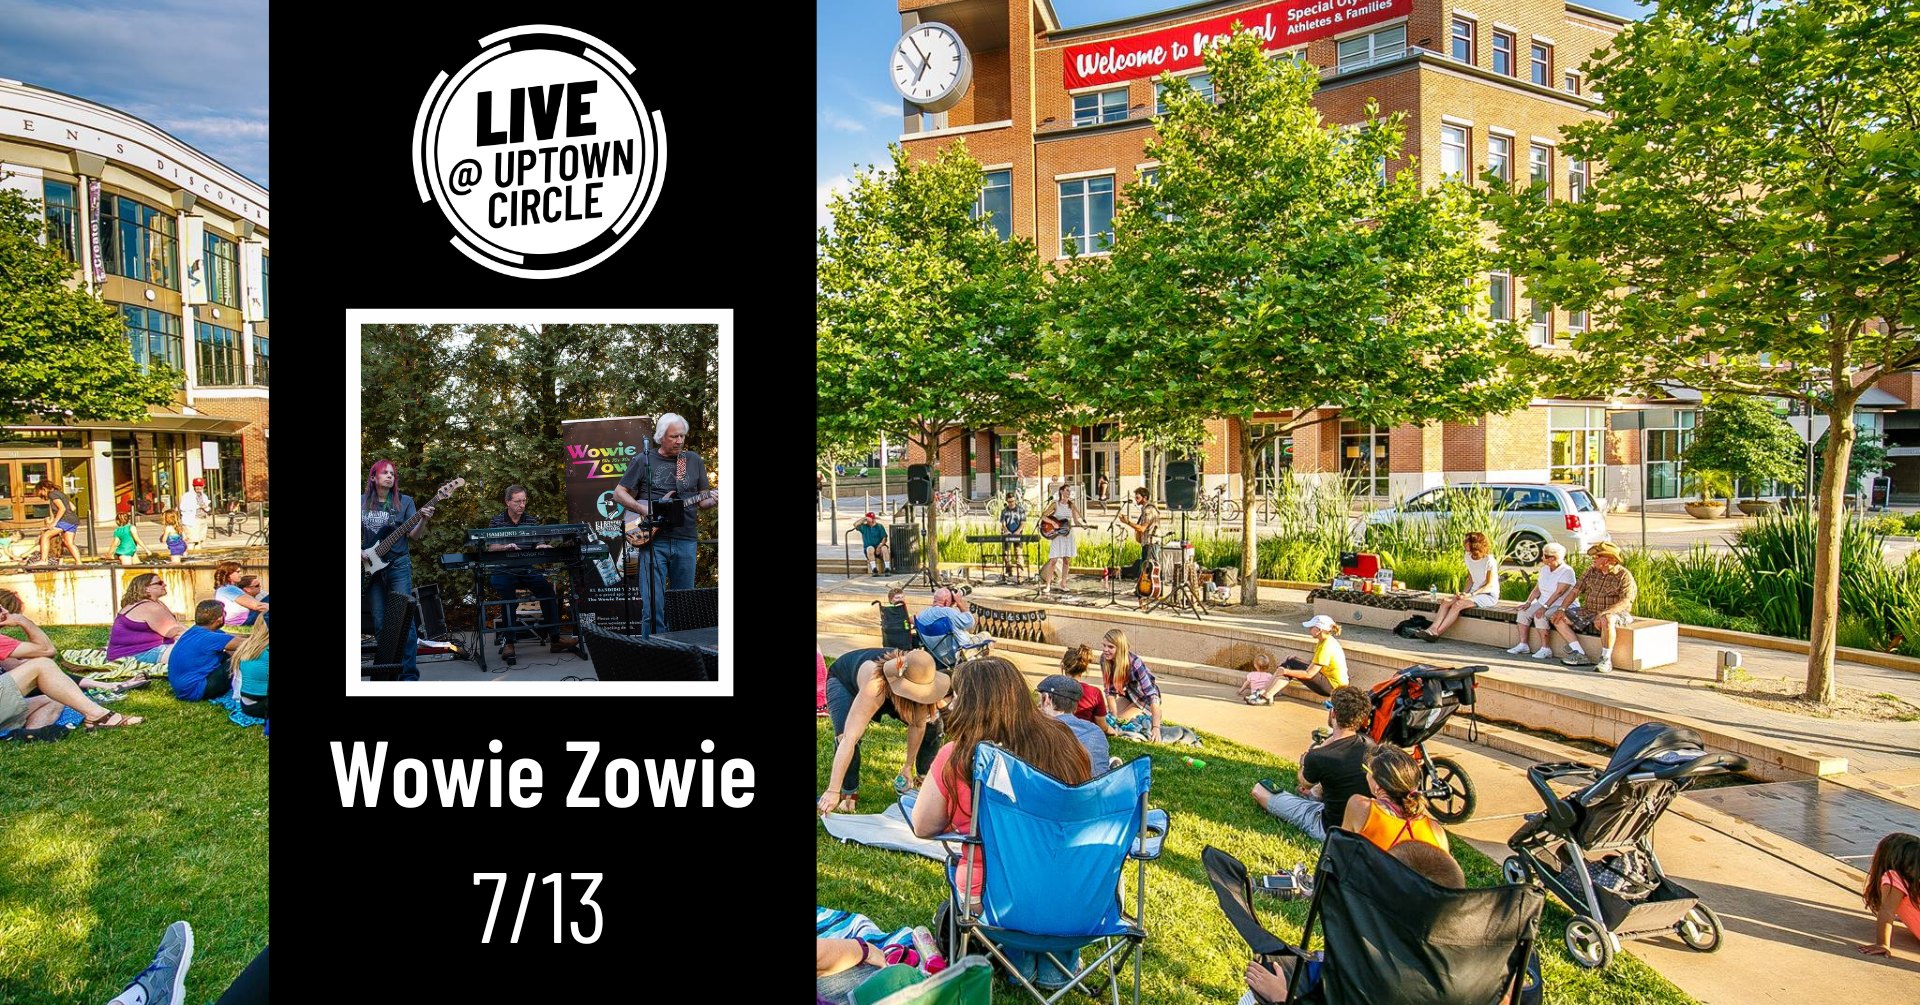 Normal LIVE presents Wowie Zowie @ Uptown Circle